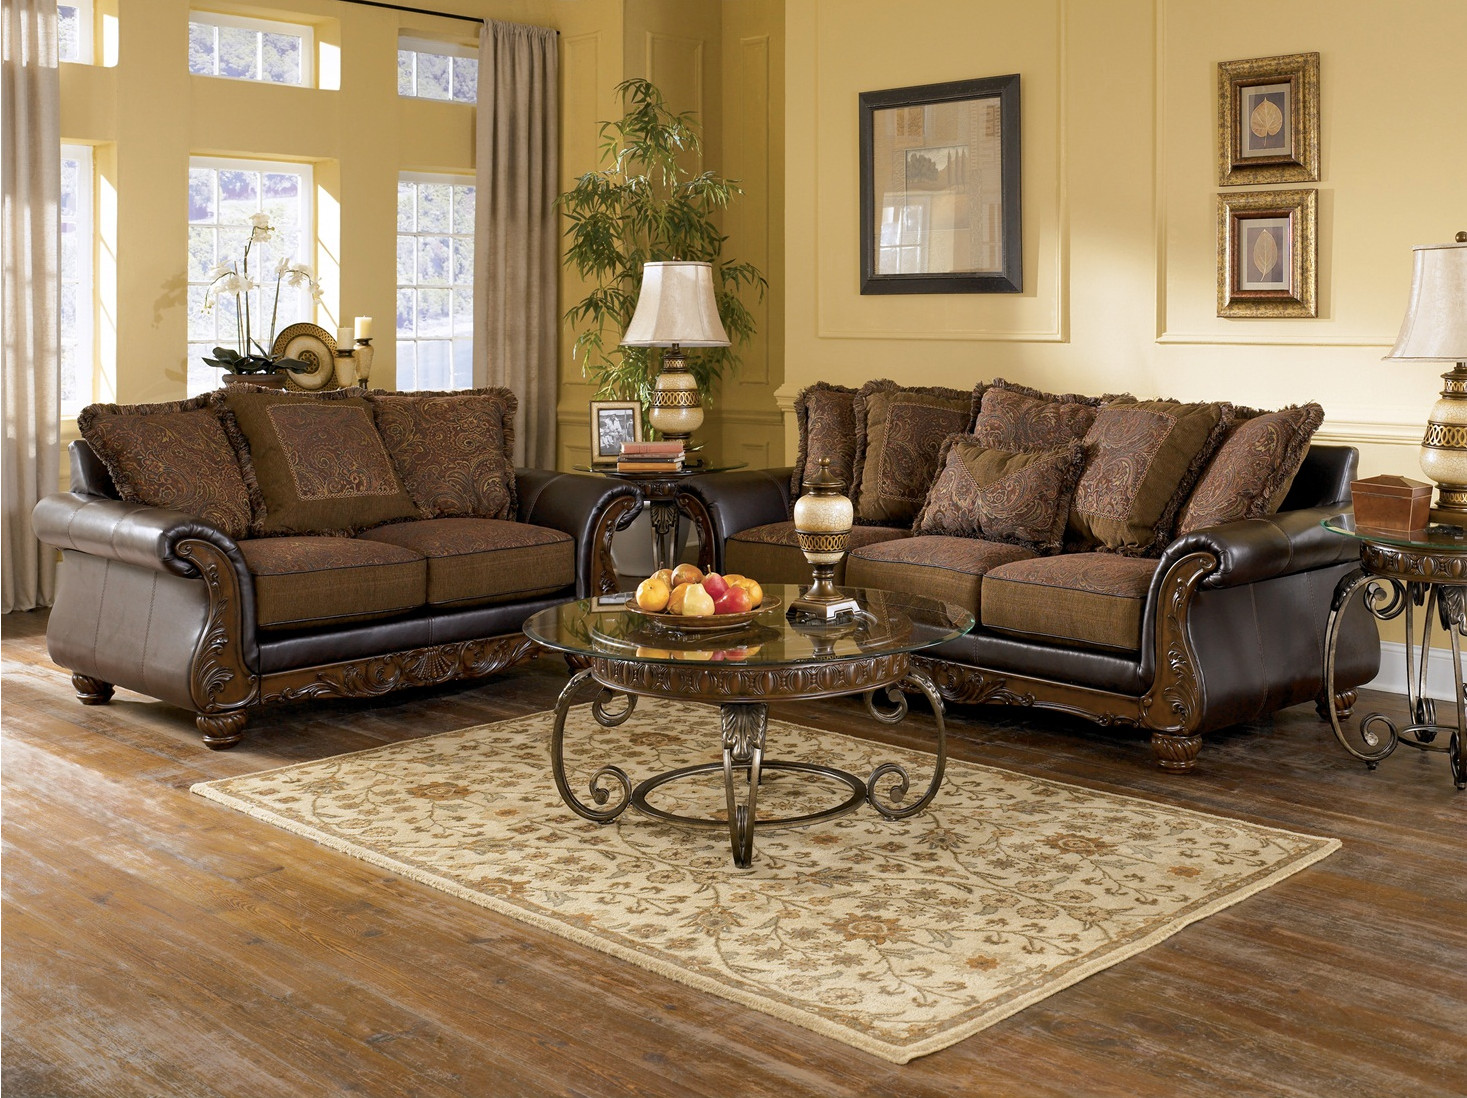 Ashley Furniture Living Room Tables
 Wilmington Traditional Living Room Furniture Set by Ashley